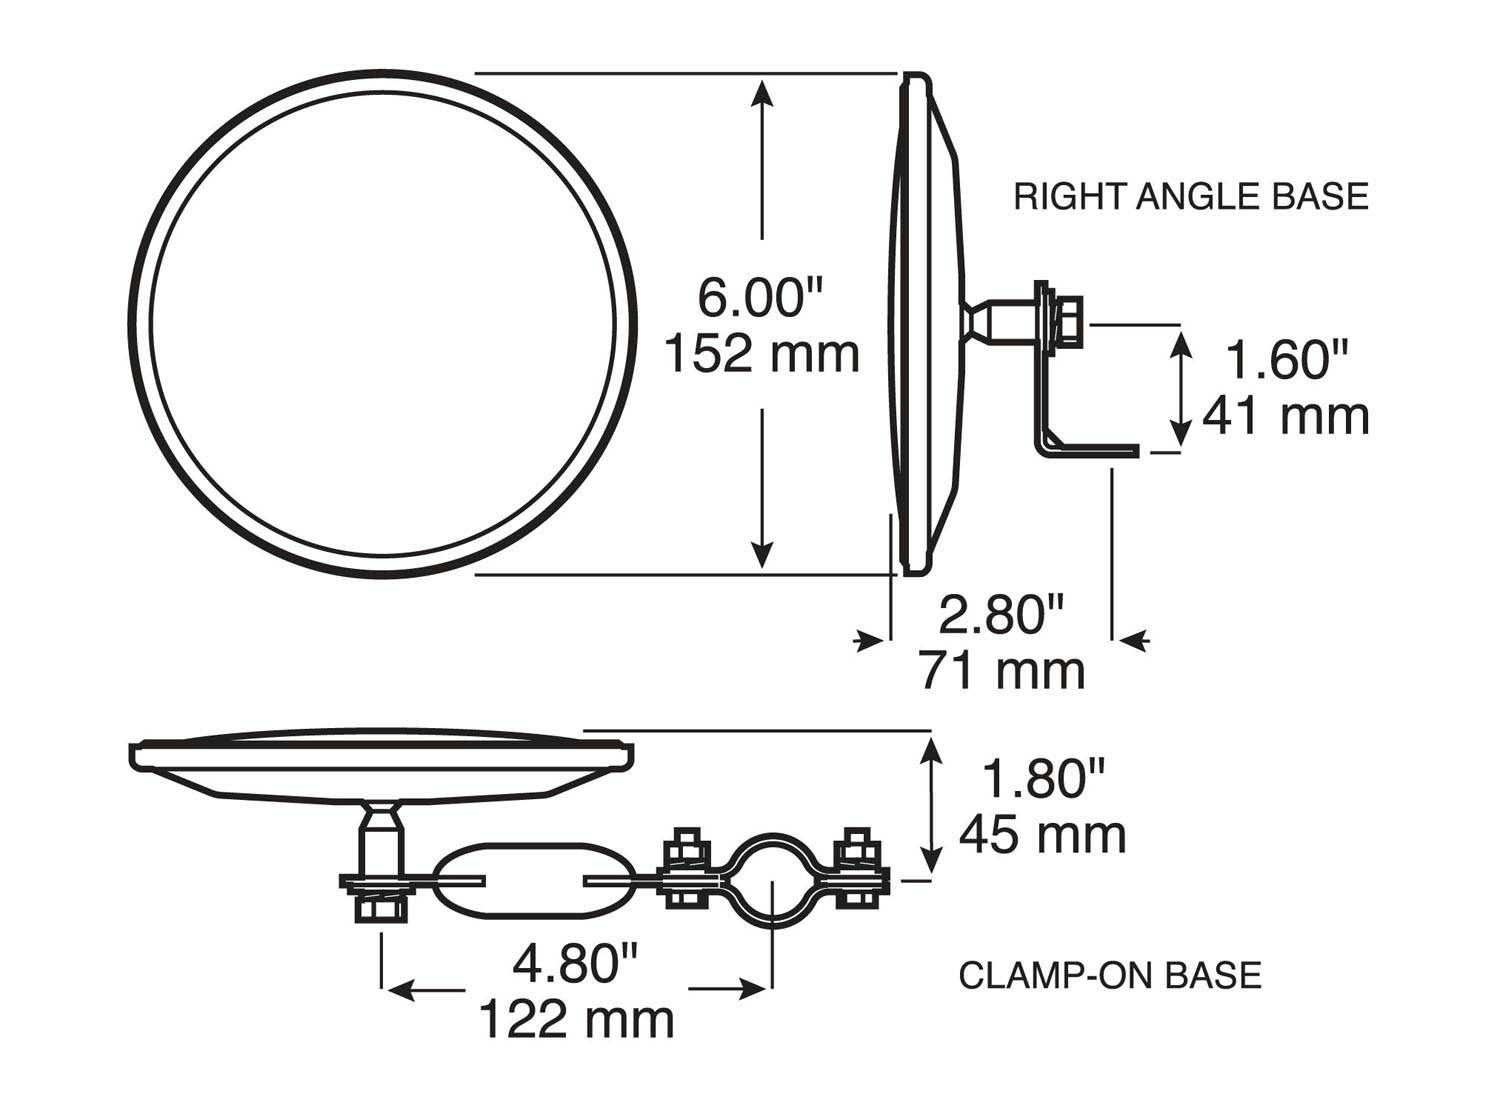 Mirror, Convex, Clamp On, Round, Stainless Steel, 6", display box (Pack of 12) - 655_line_dual_2view-BX5_ab4e3565-01b7-4b49-aaf7-adb222b4a35c